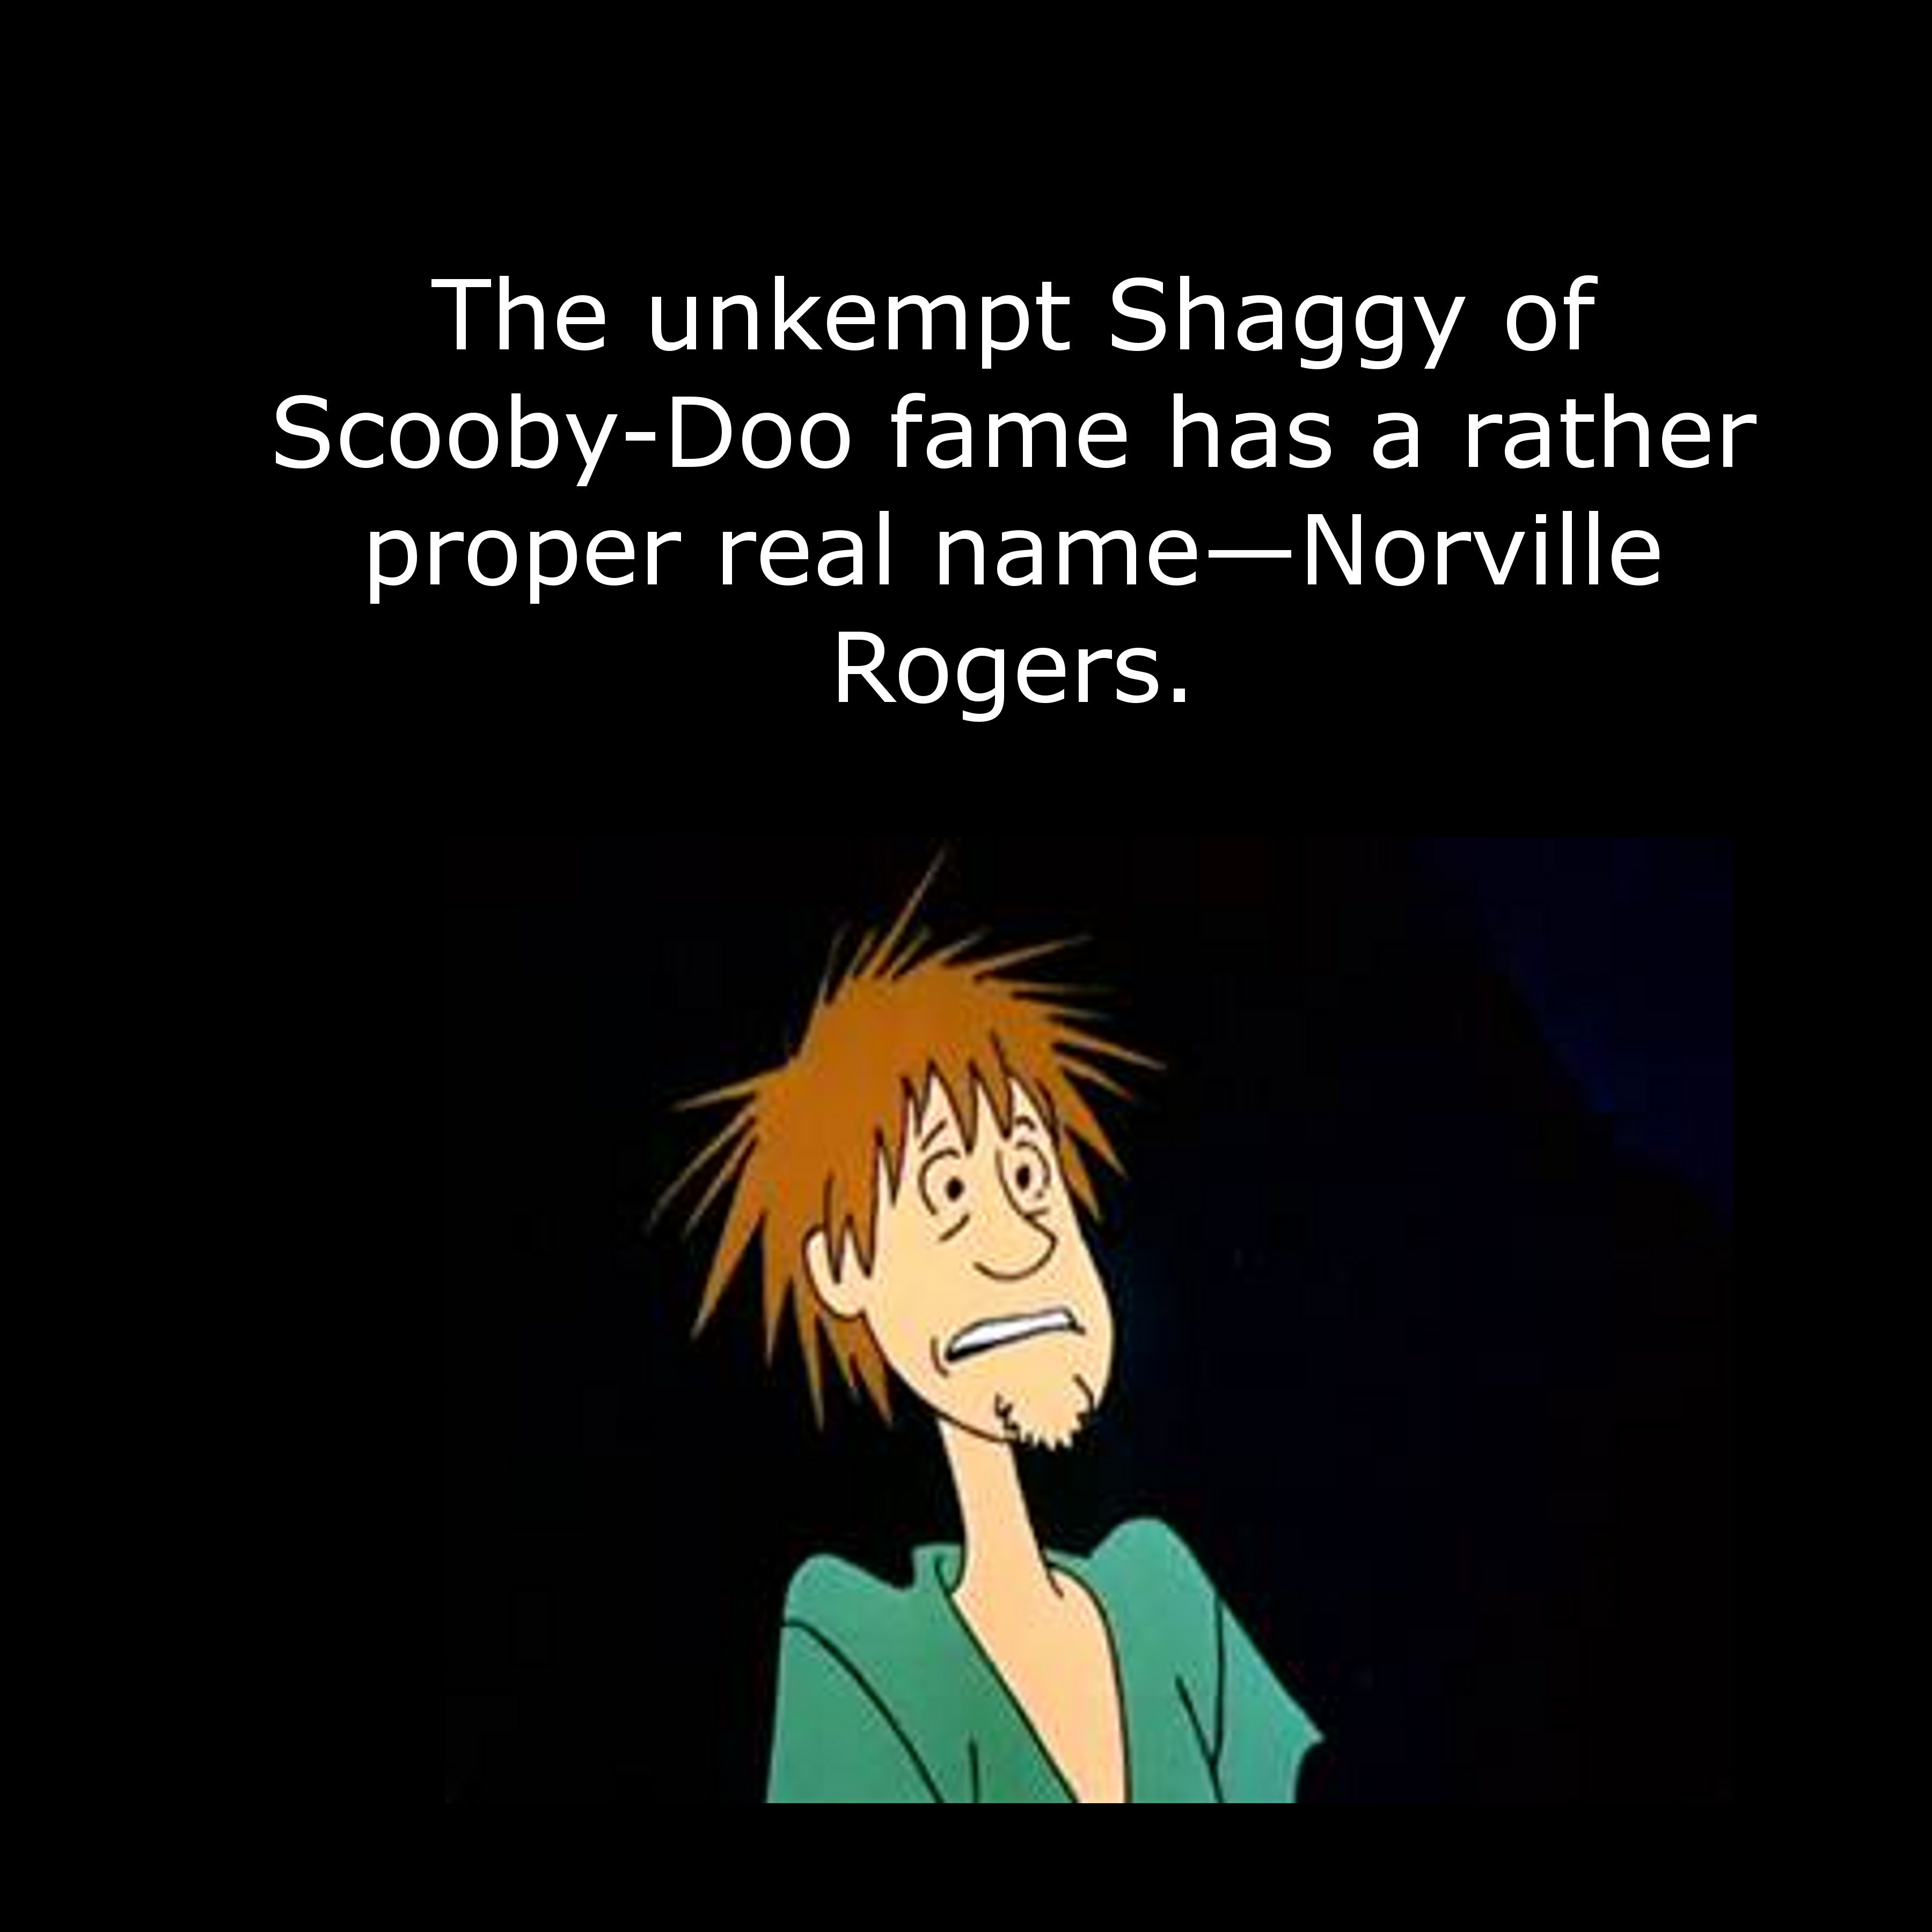 cartoon - The unkempt Shaggy of ScoobyDoo fame has a rather proper real nameNorville Rogers.